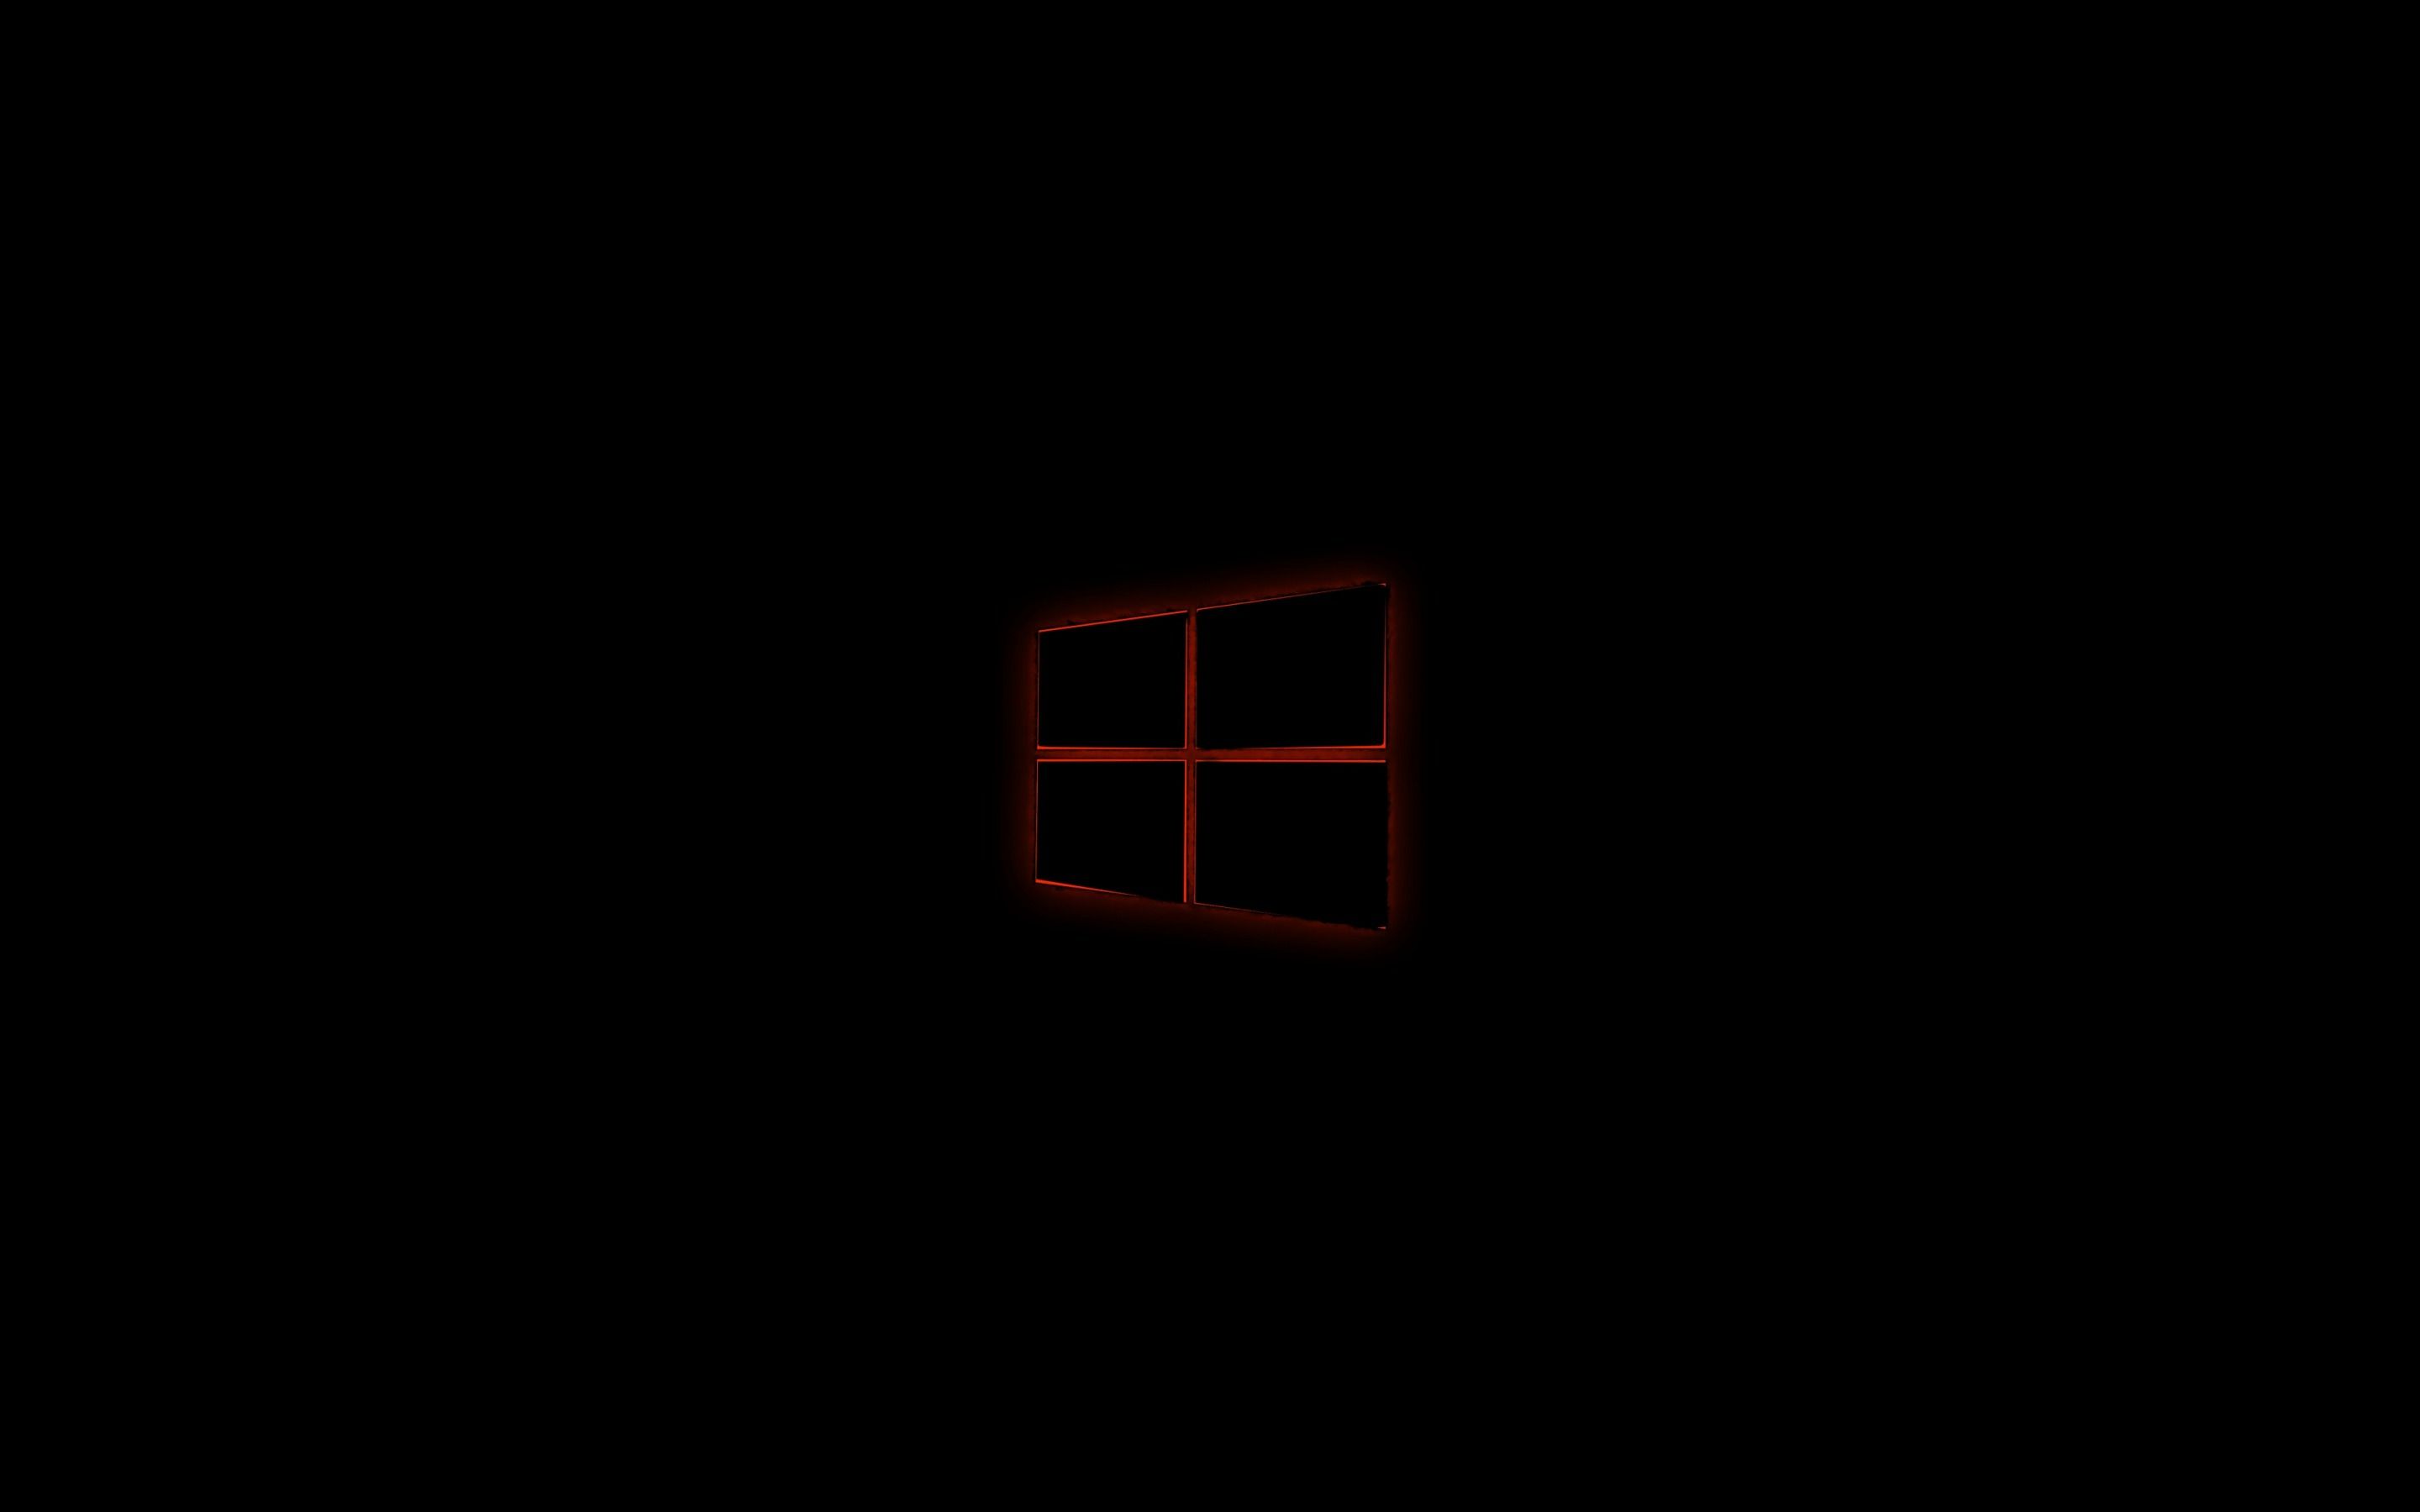 Download wallpaper Windows logo on a black background, orange backlight, creative logo, win art for desktop with resolution 2880x1800. High Quality HD picture wallpaper